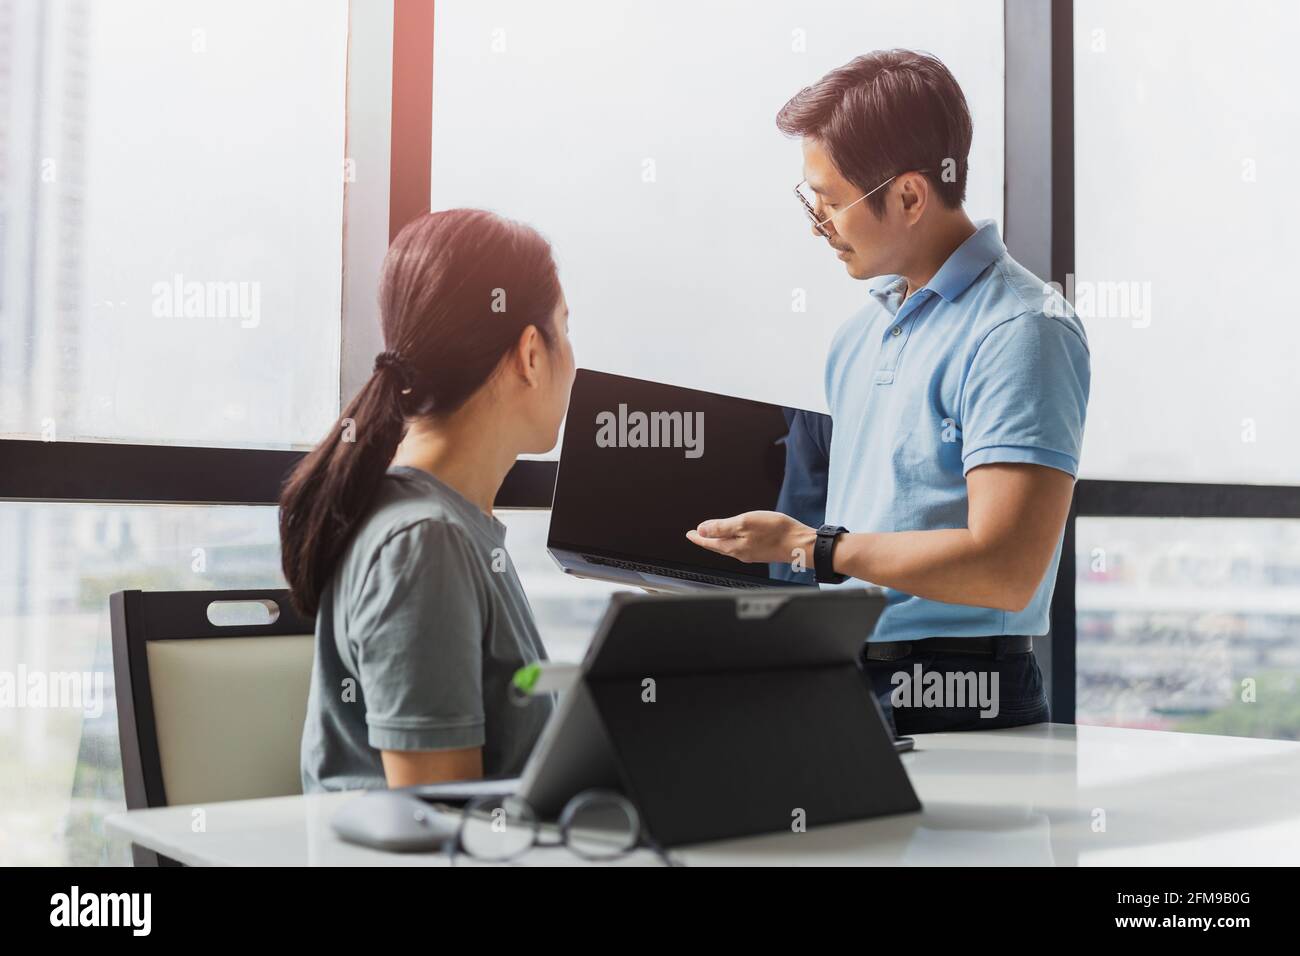 Businessman showing laptop display to woman colleague on work project. Stock Photo